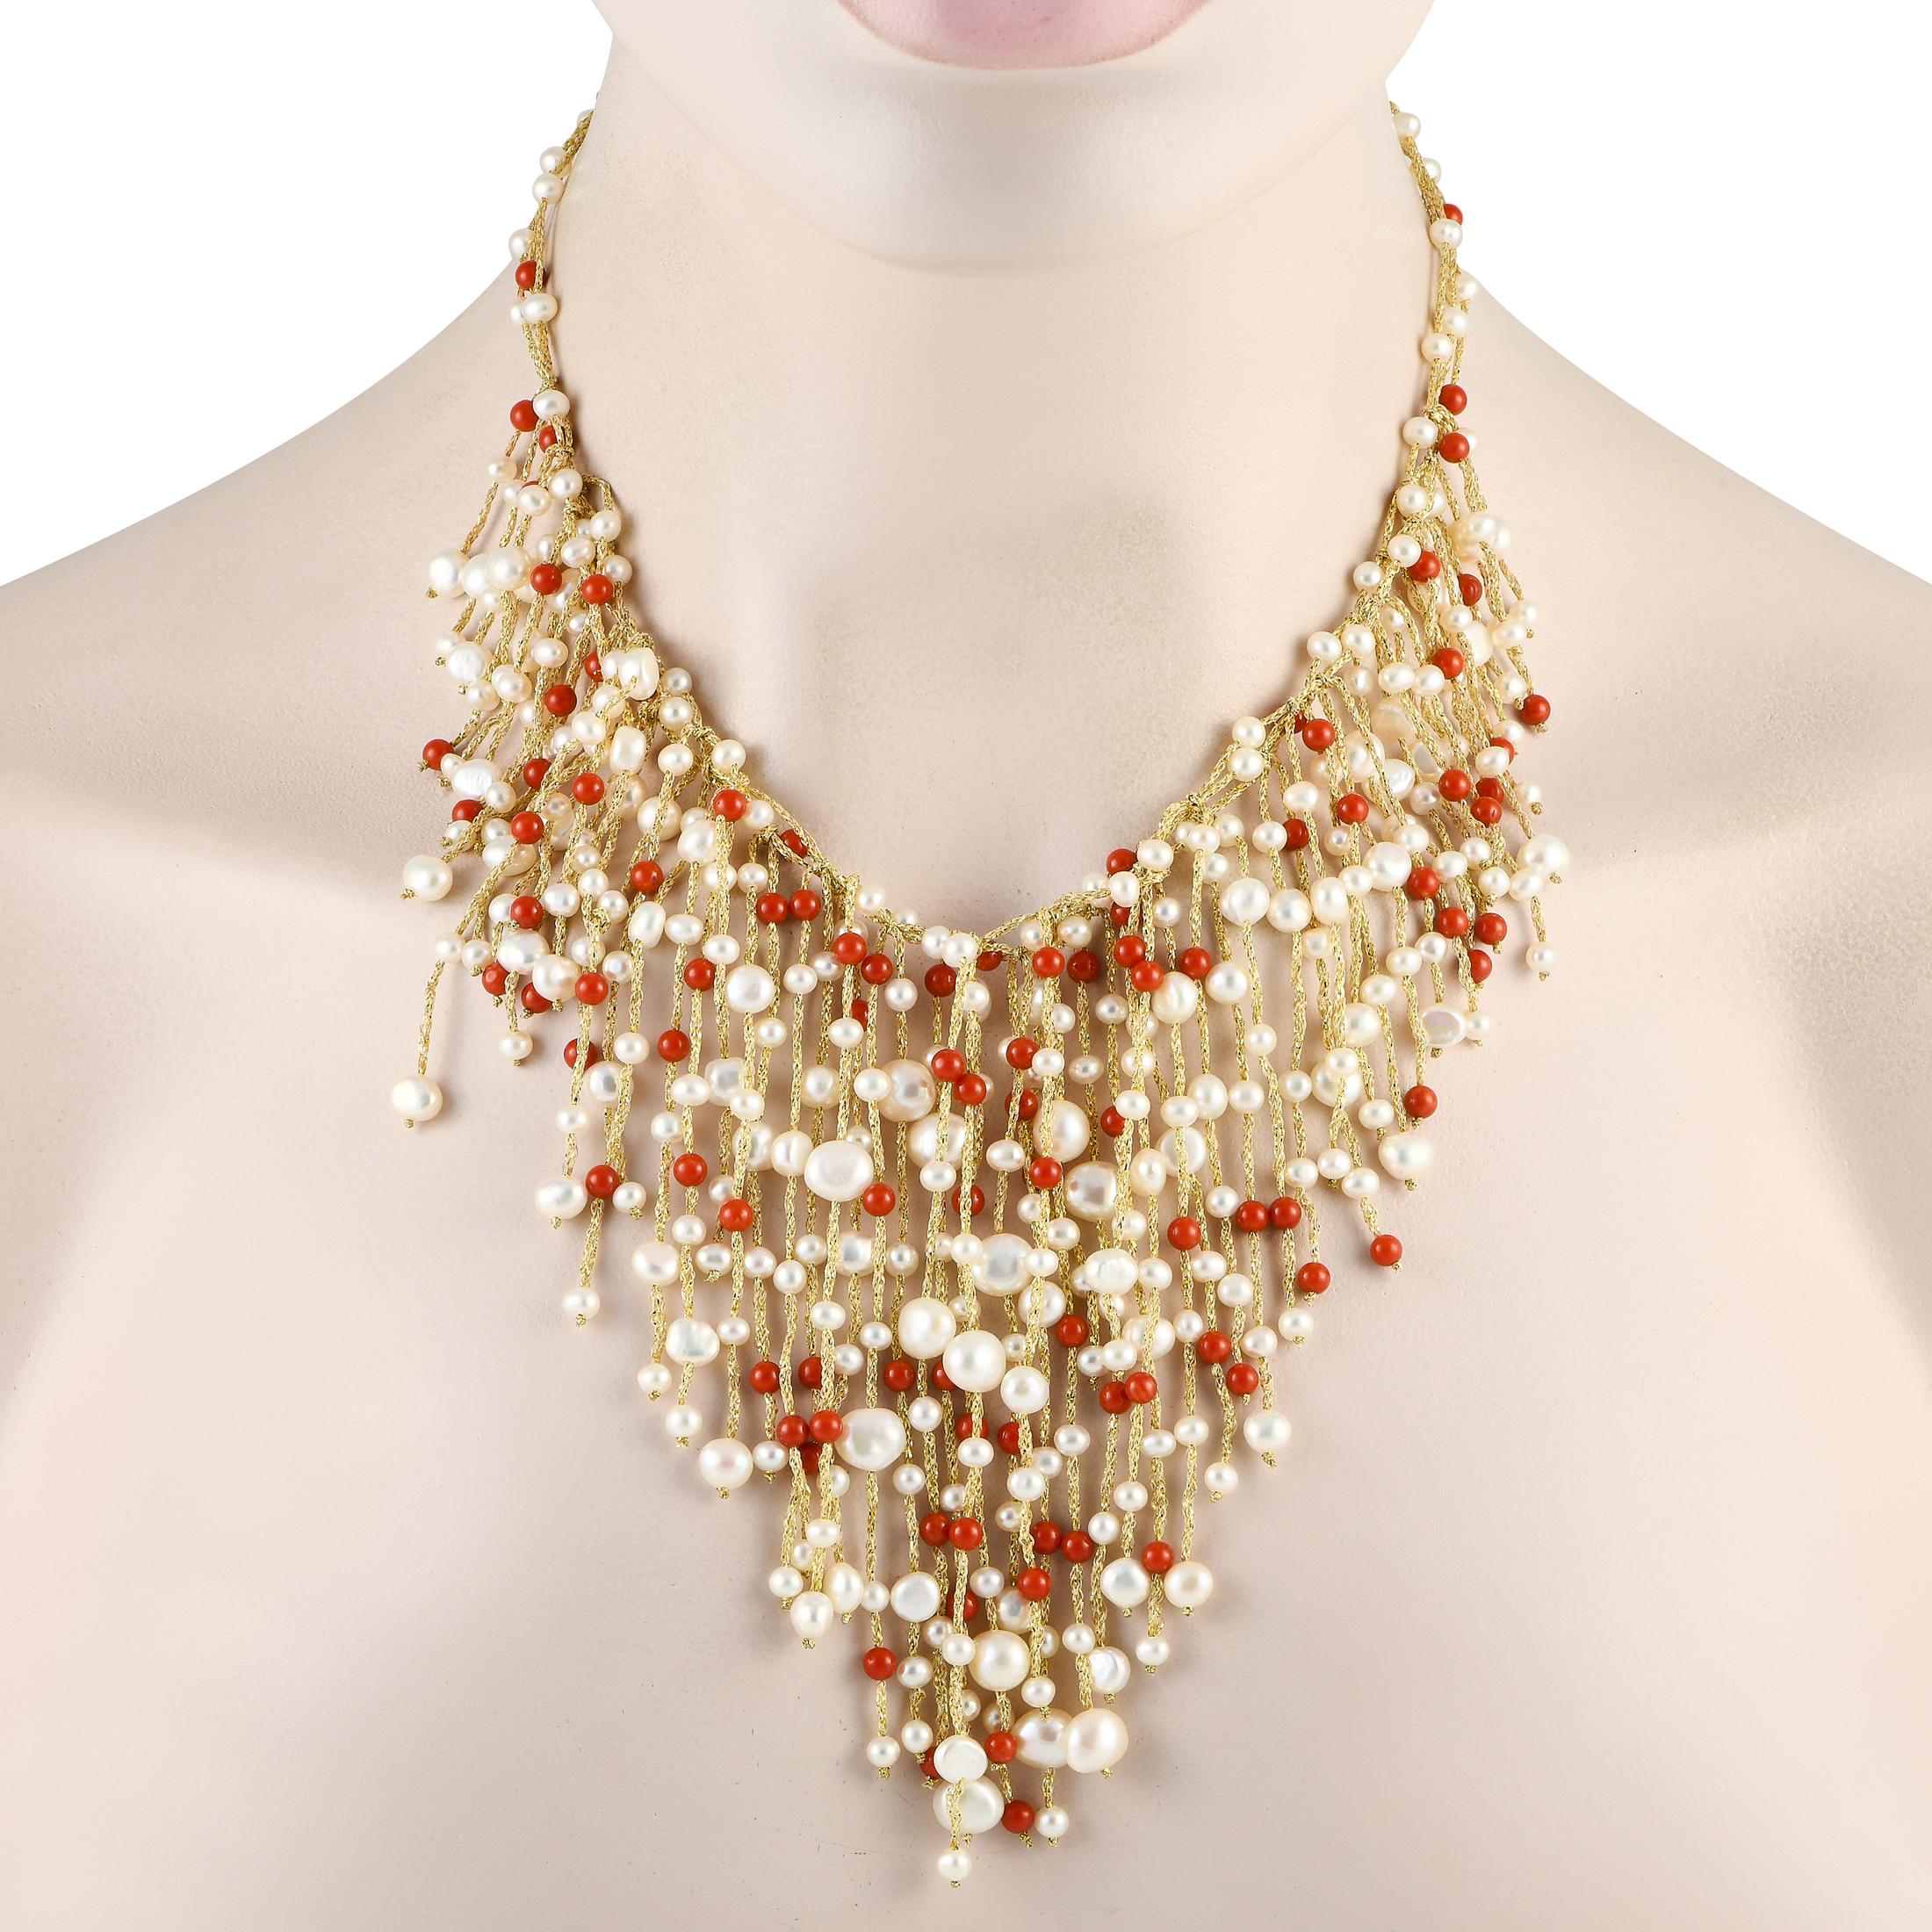 Looking for a way to add color and texture to your style? Adorn your dcolletage with this mood-uplifting fringe necklace. This piece features a 14K yellow gold necklace with a fishhook clasp. Suspending and cascading from the main necklace are